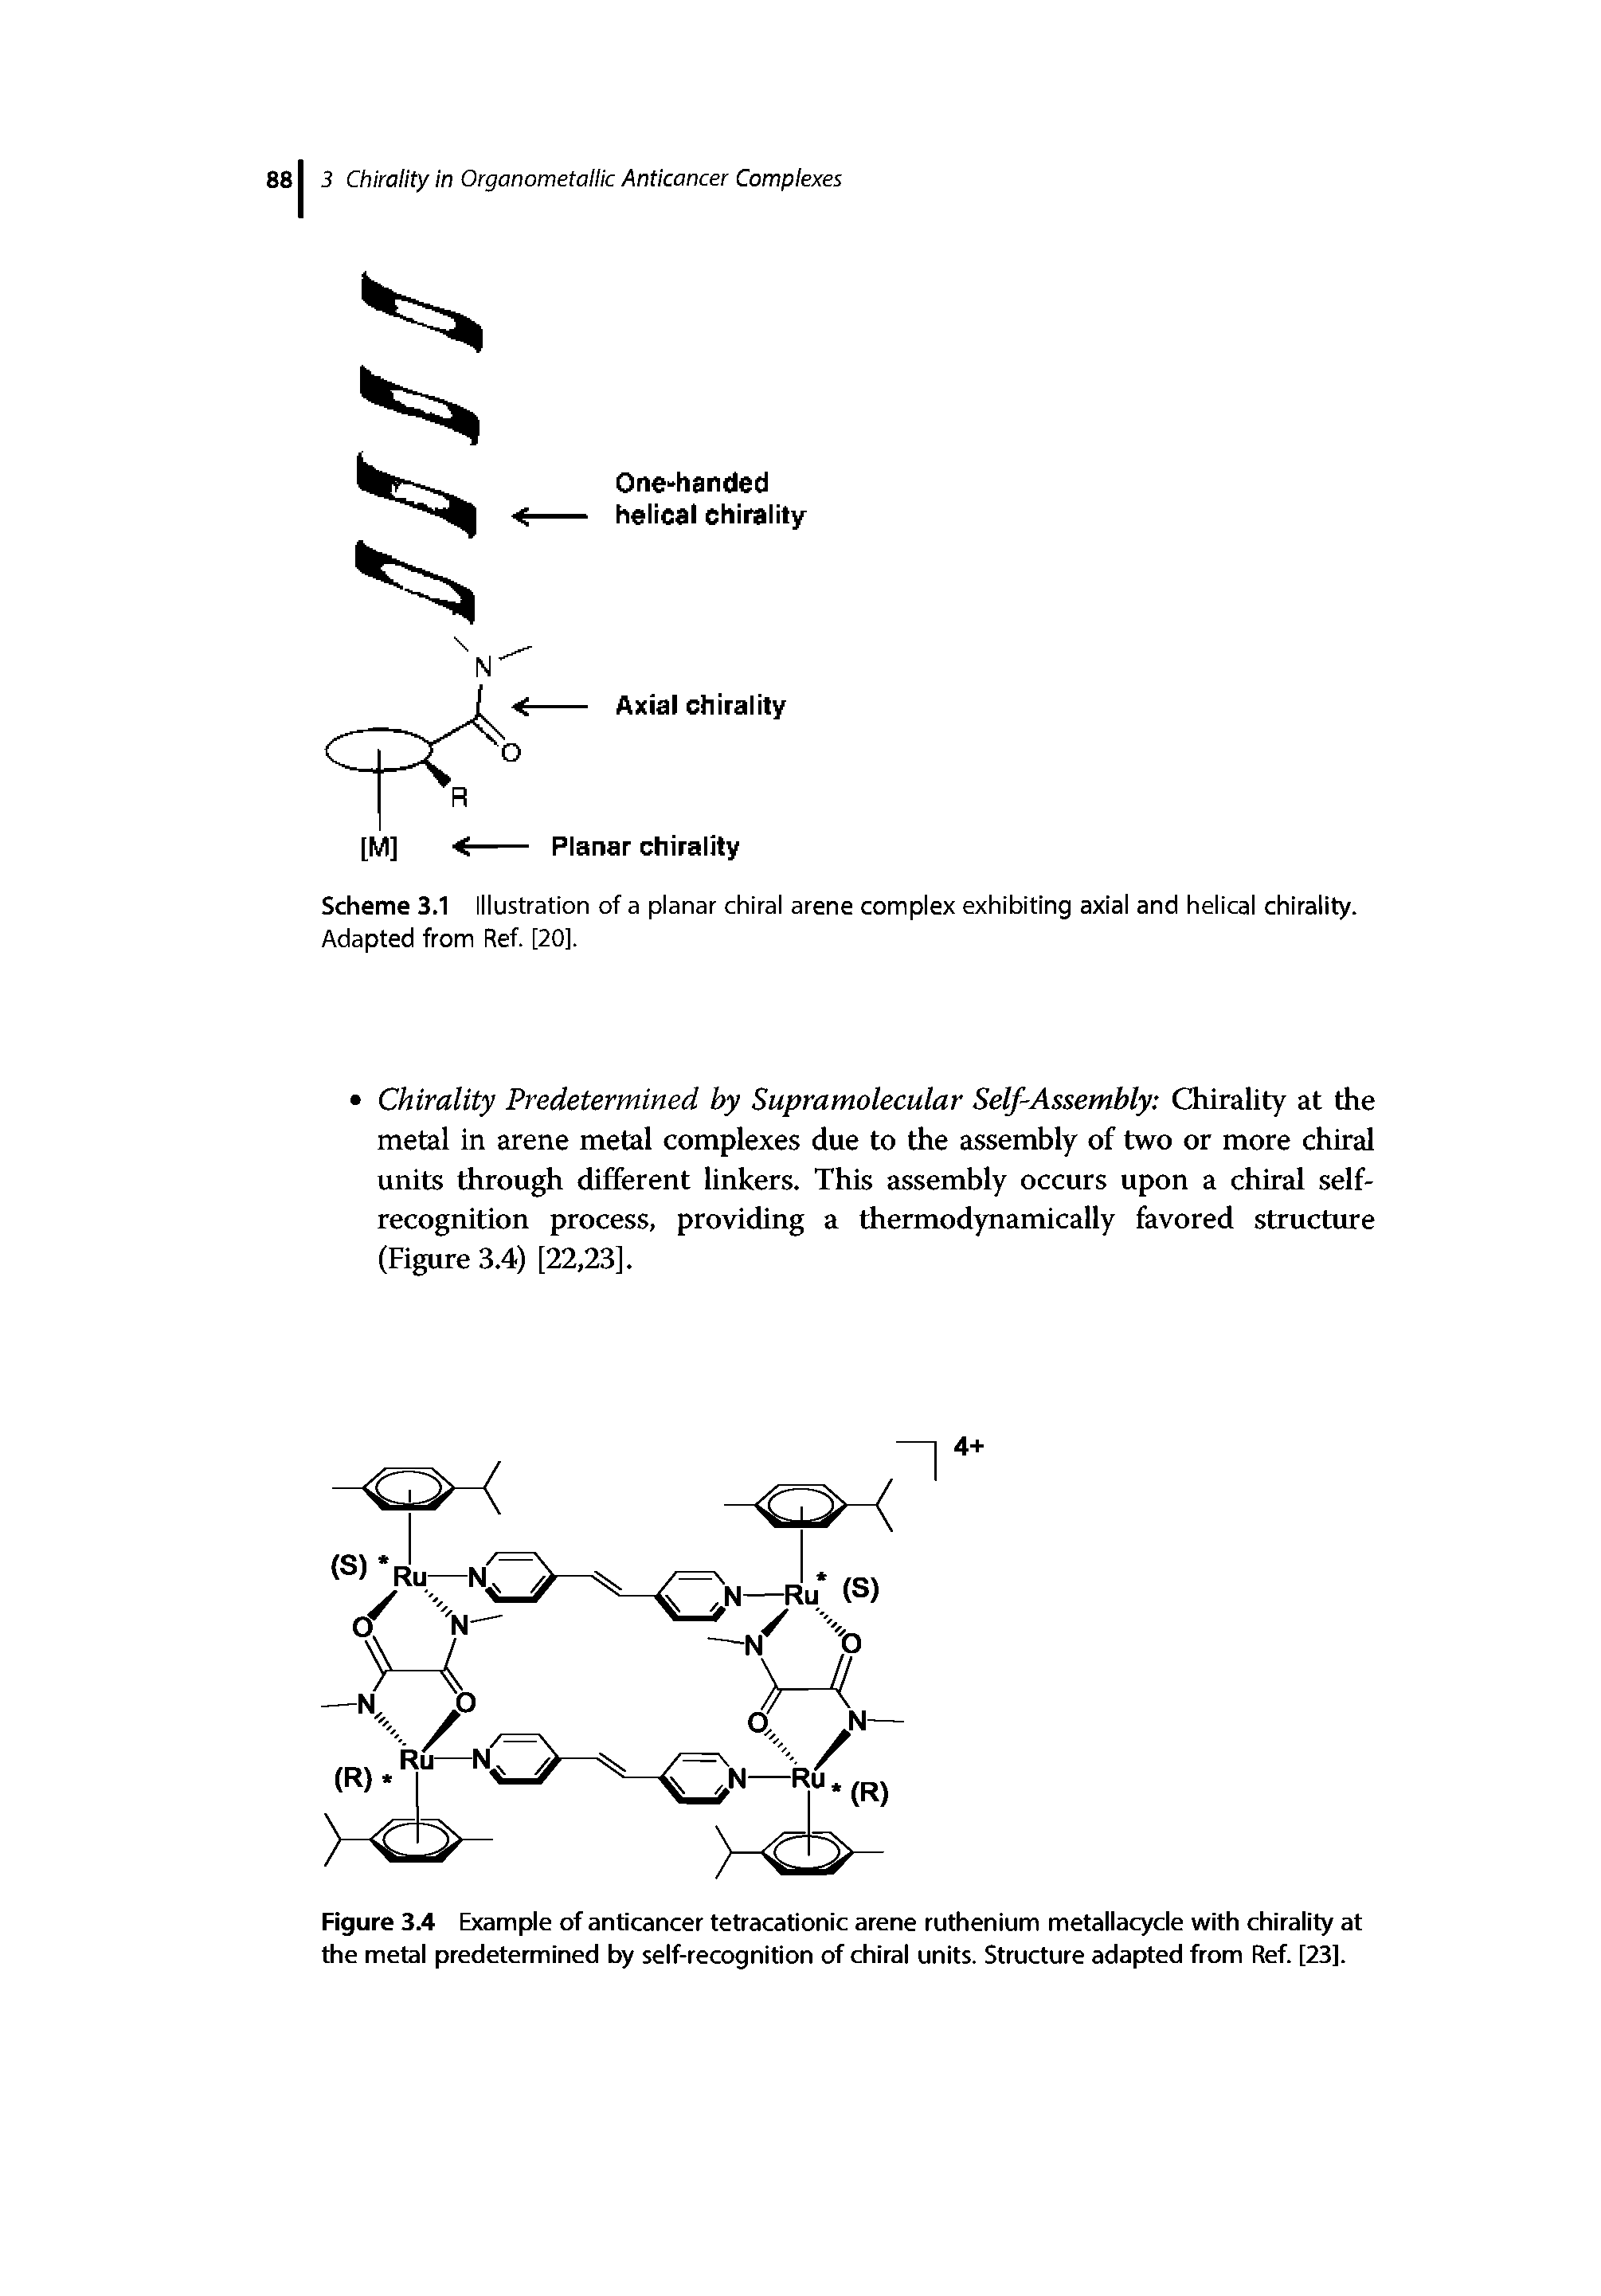 Figure 3.4 Example of anticancer tetracationic arene ruthenium metallacycle with chirality at the metal predetermined by self-recognition of chiral units. Structure adapted from Ref. [23].